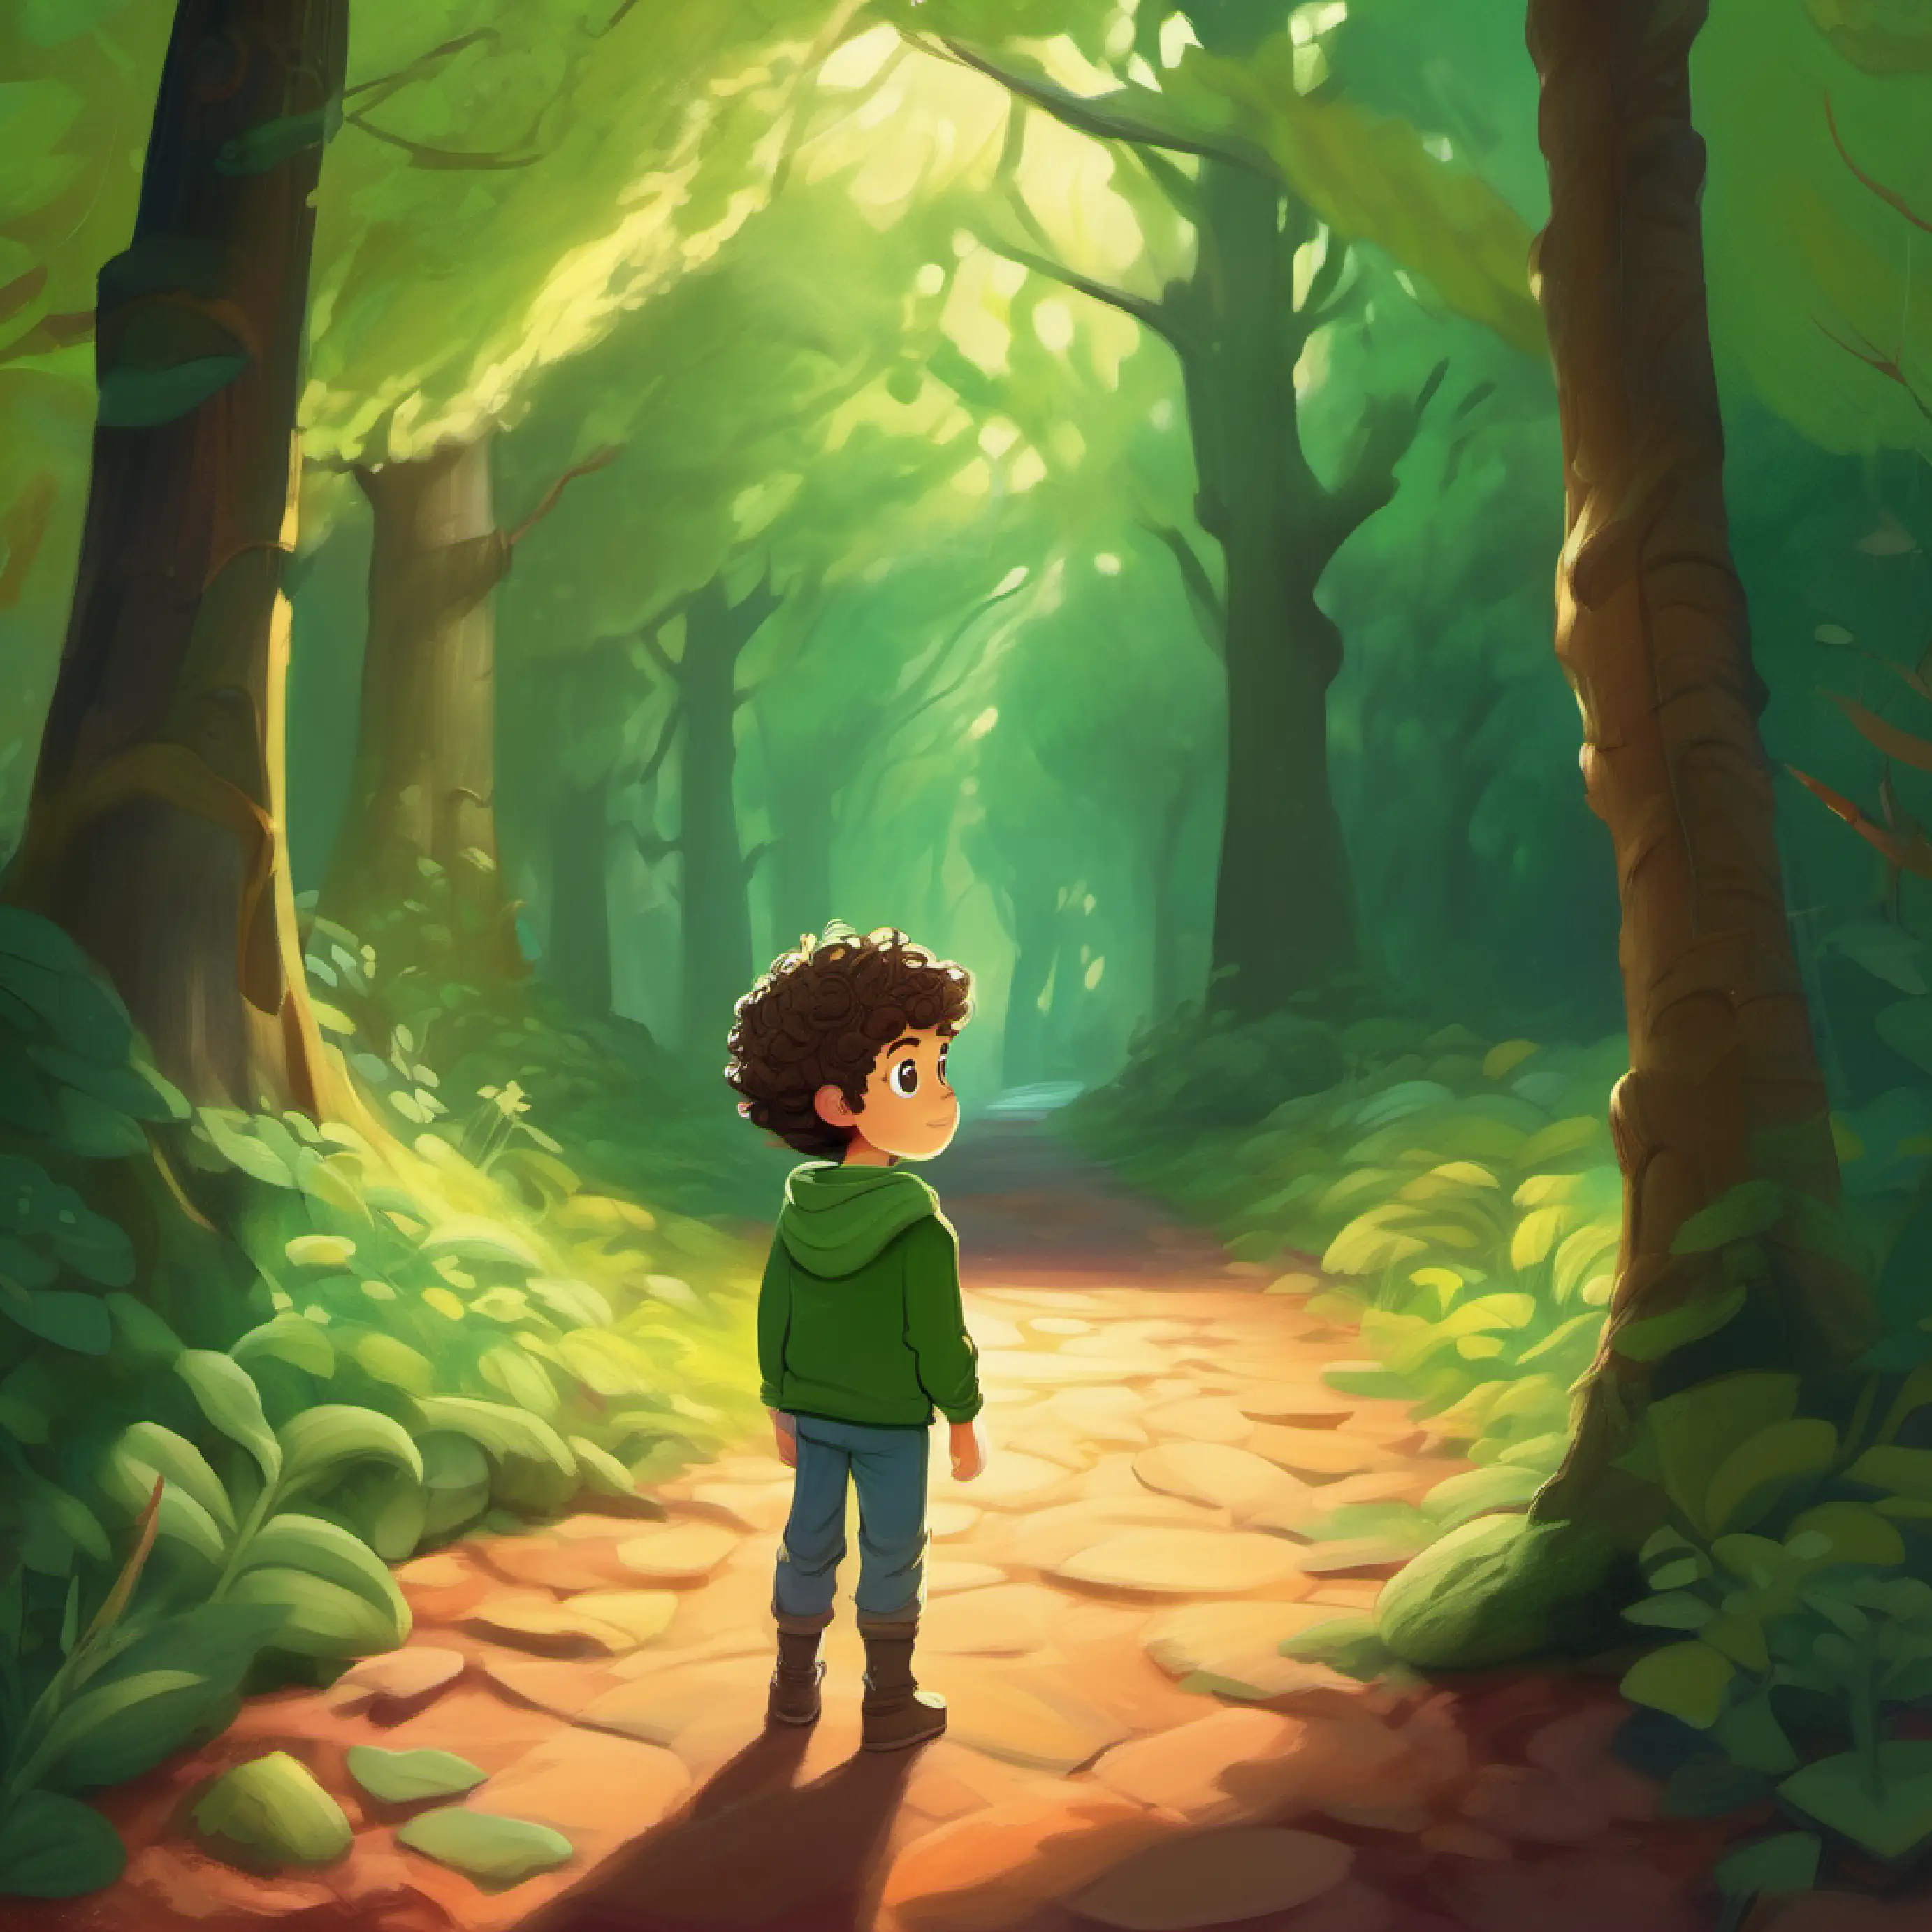 Introduction, Little boy, curly hair, big green eyes, scared but brave in his room, wants to explore woods, but is scared